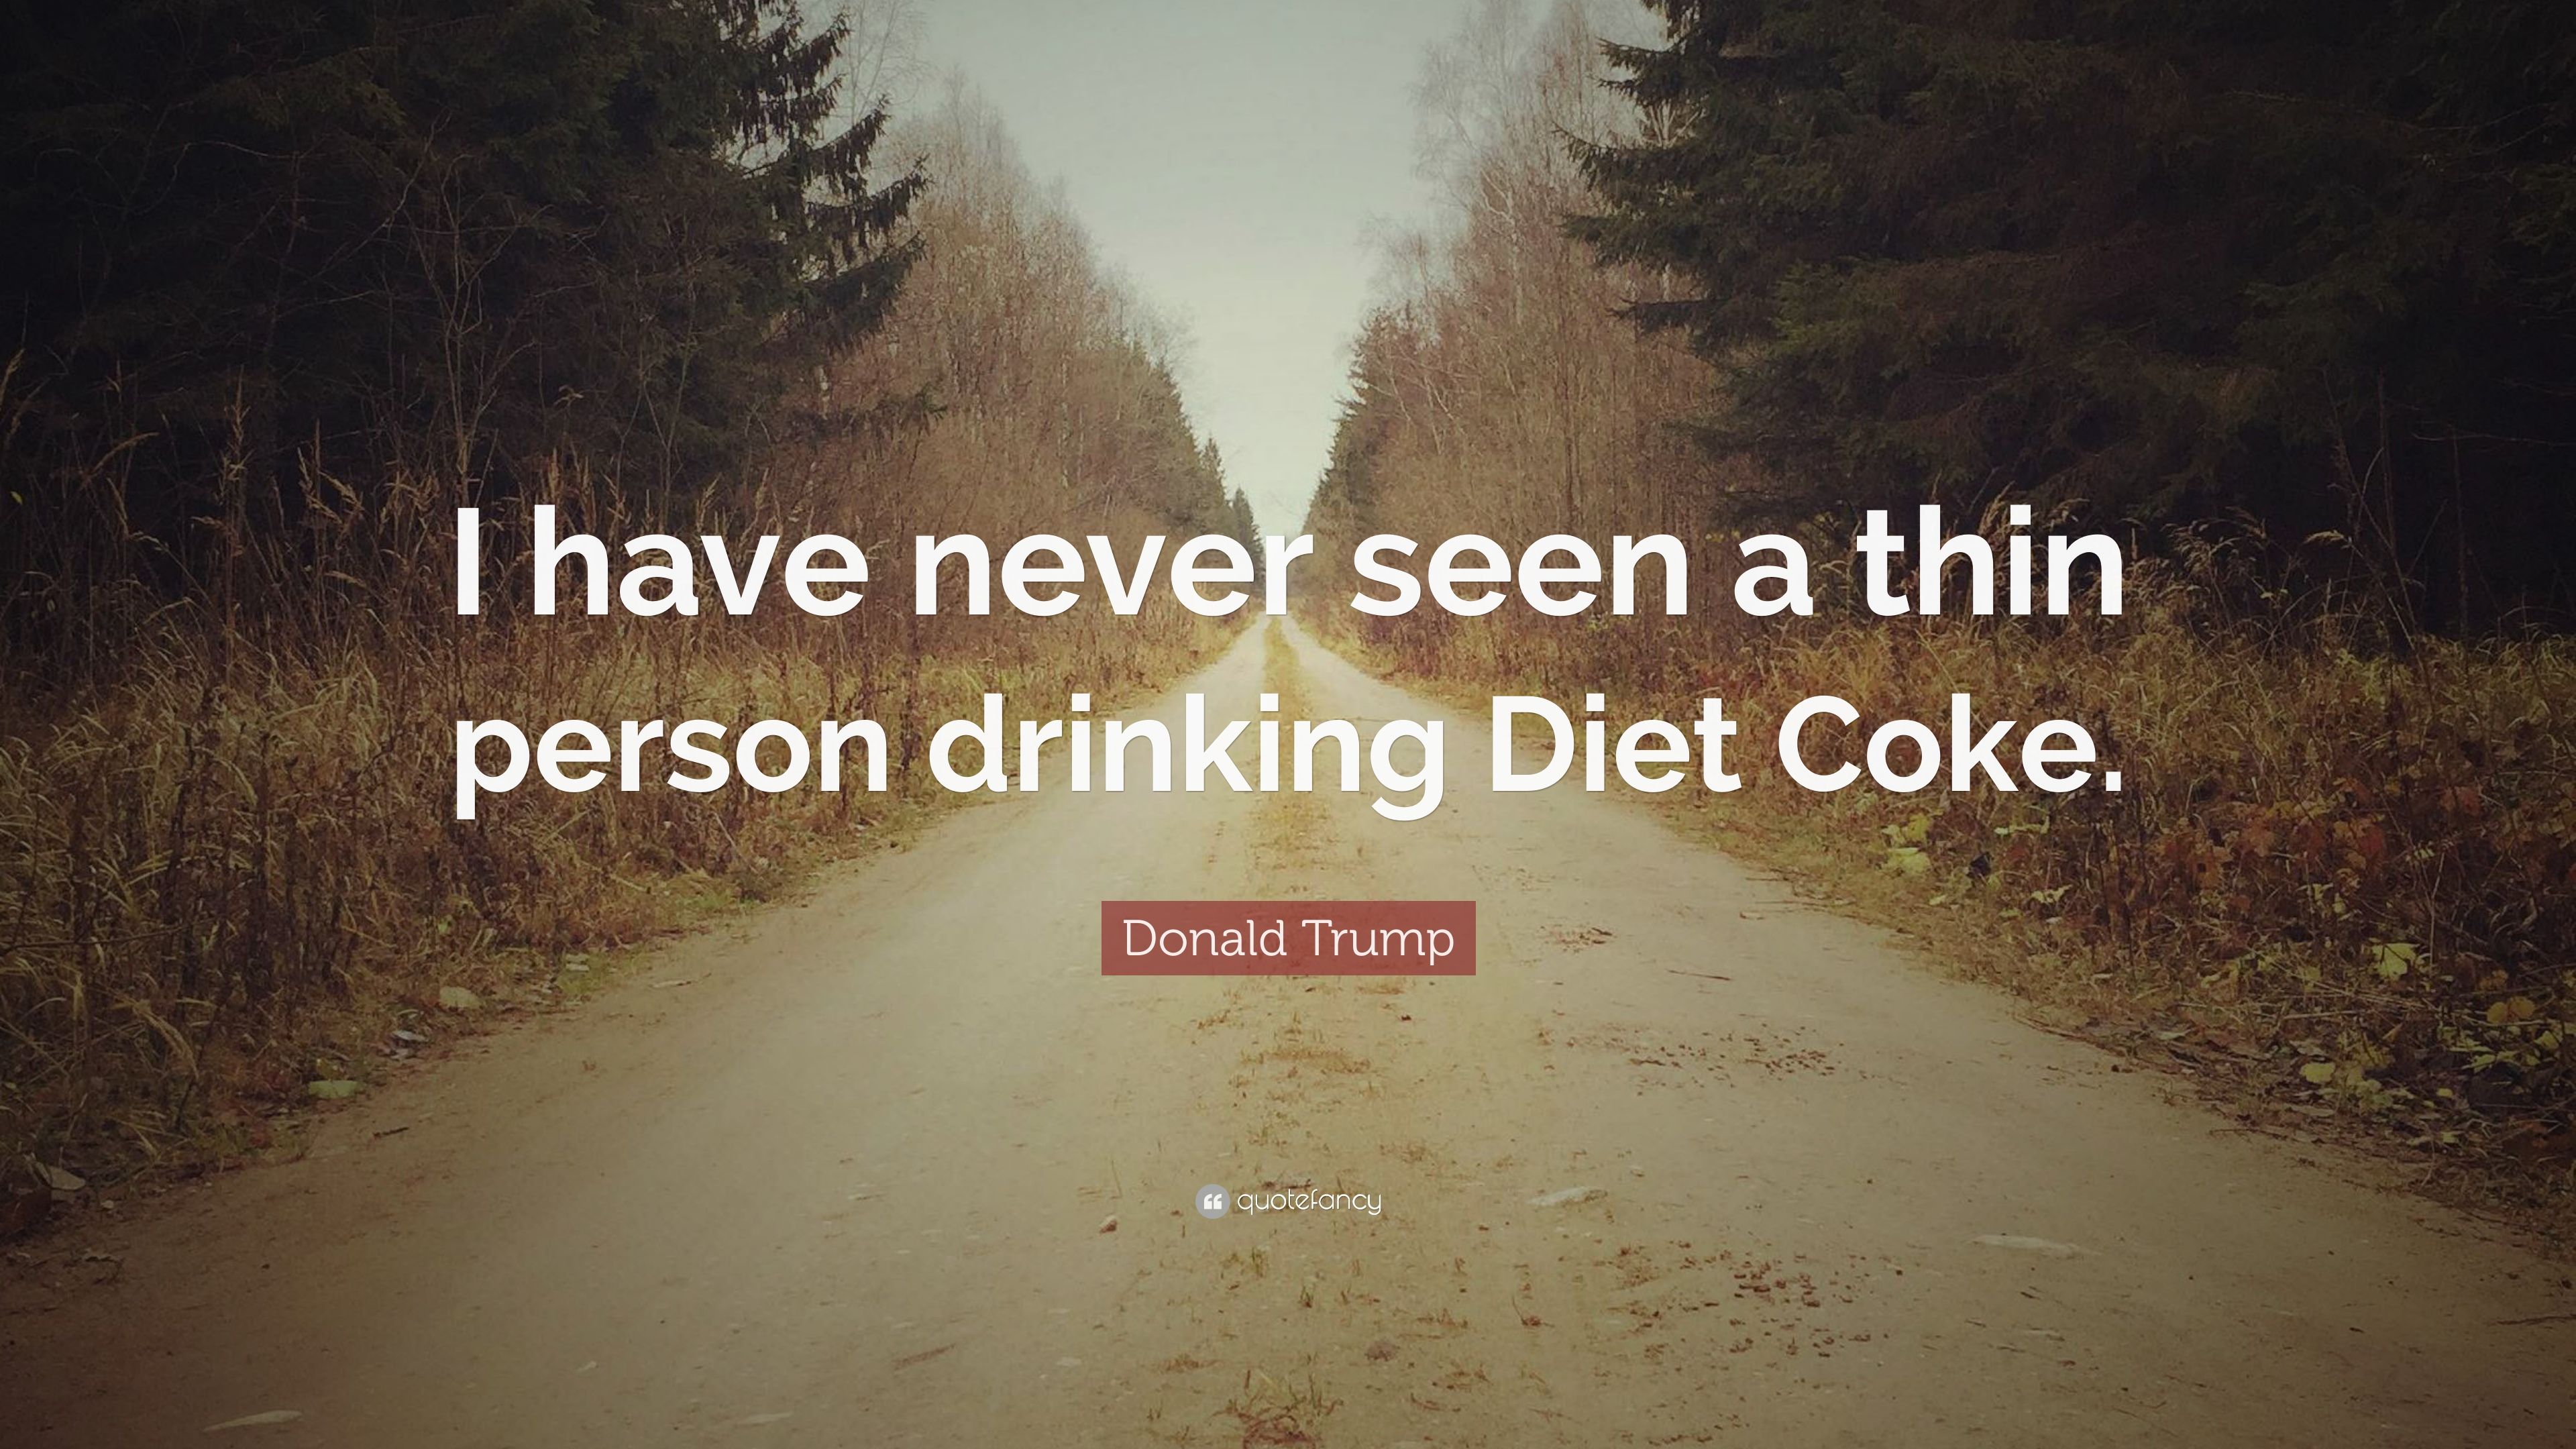 Donald Trump Quote: “I have never seen a thin person drinking Diet Coke.” (9 wallpaper)